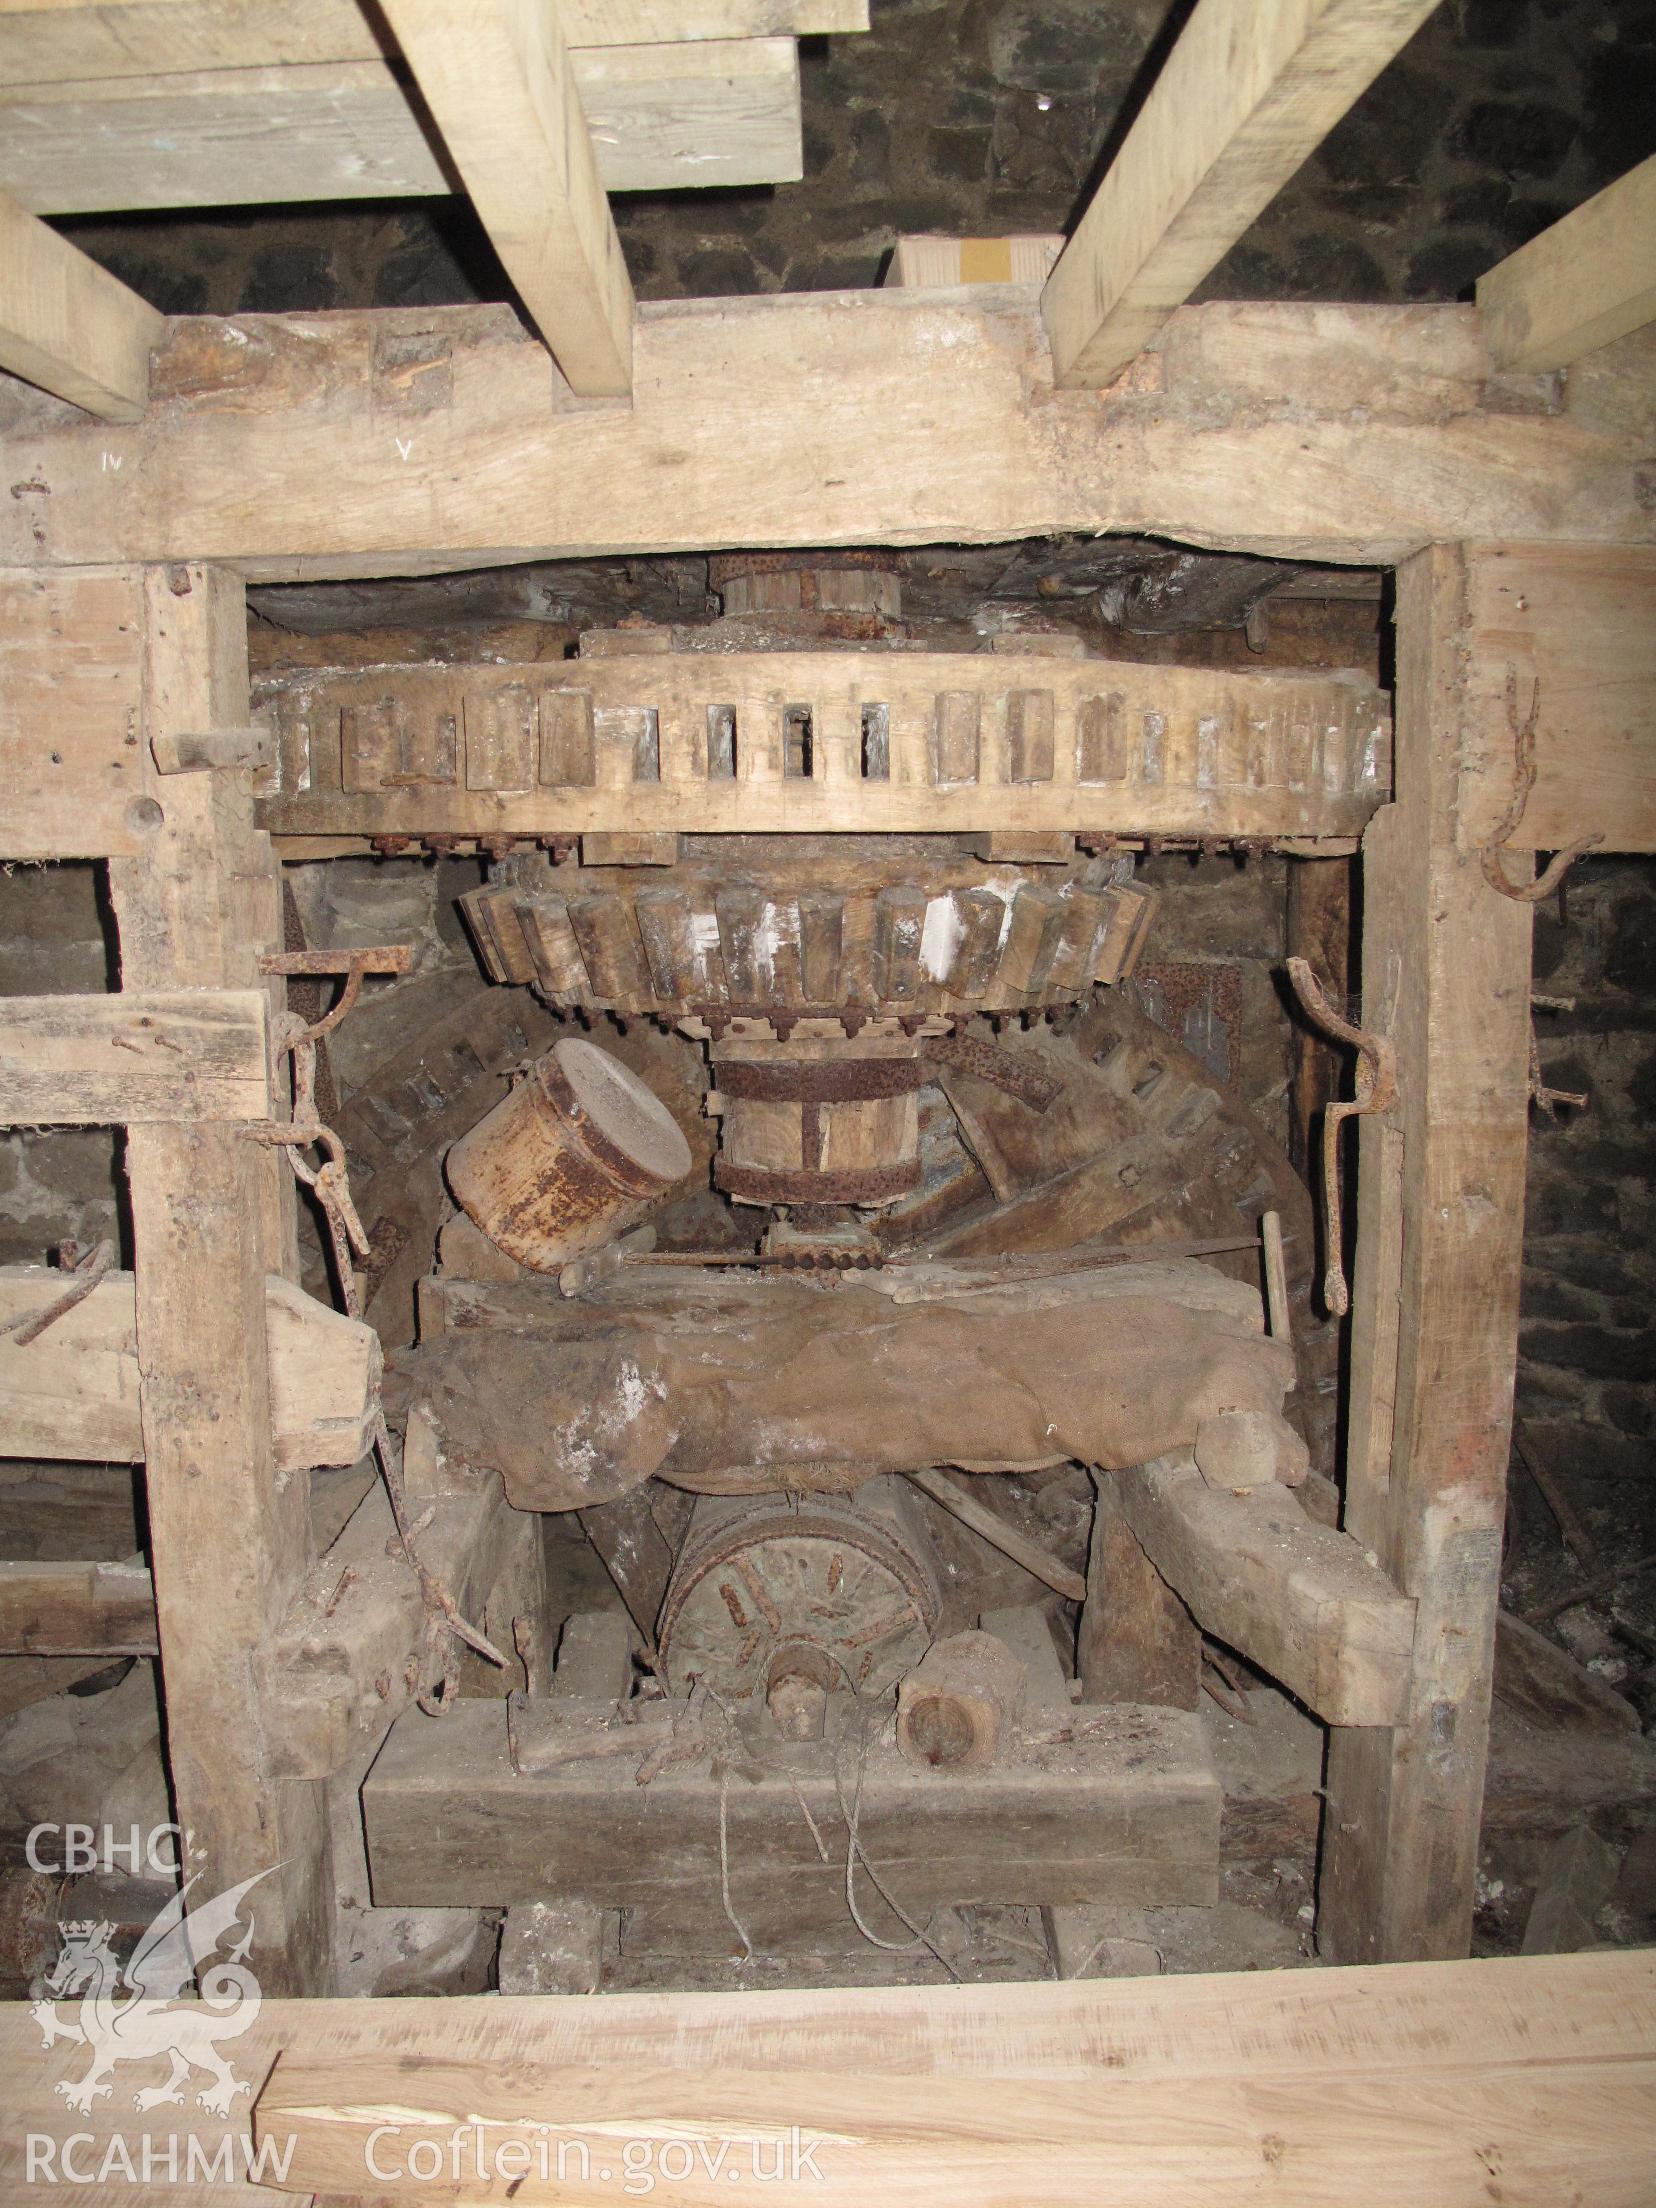 Coedtrewernau corn mill interior showing hurst frame and early wooden gearing.